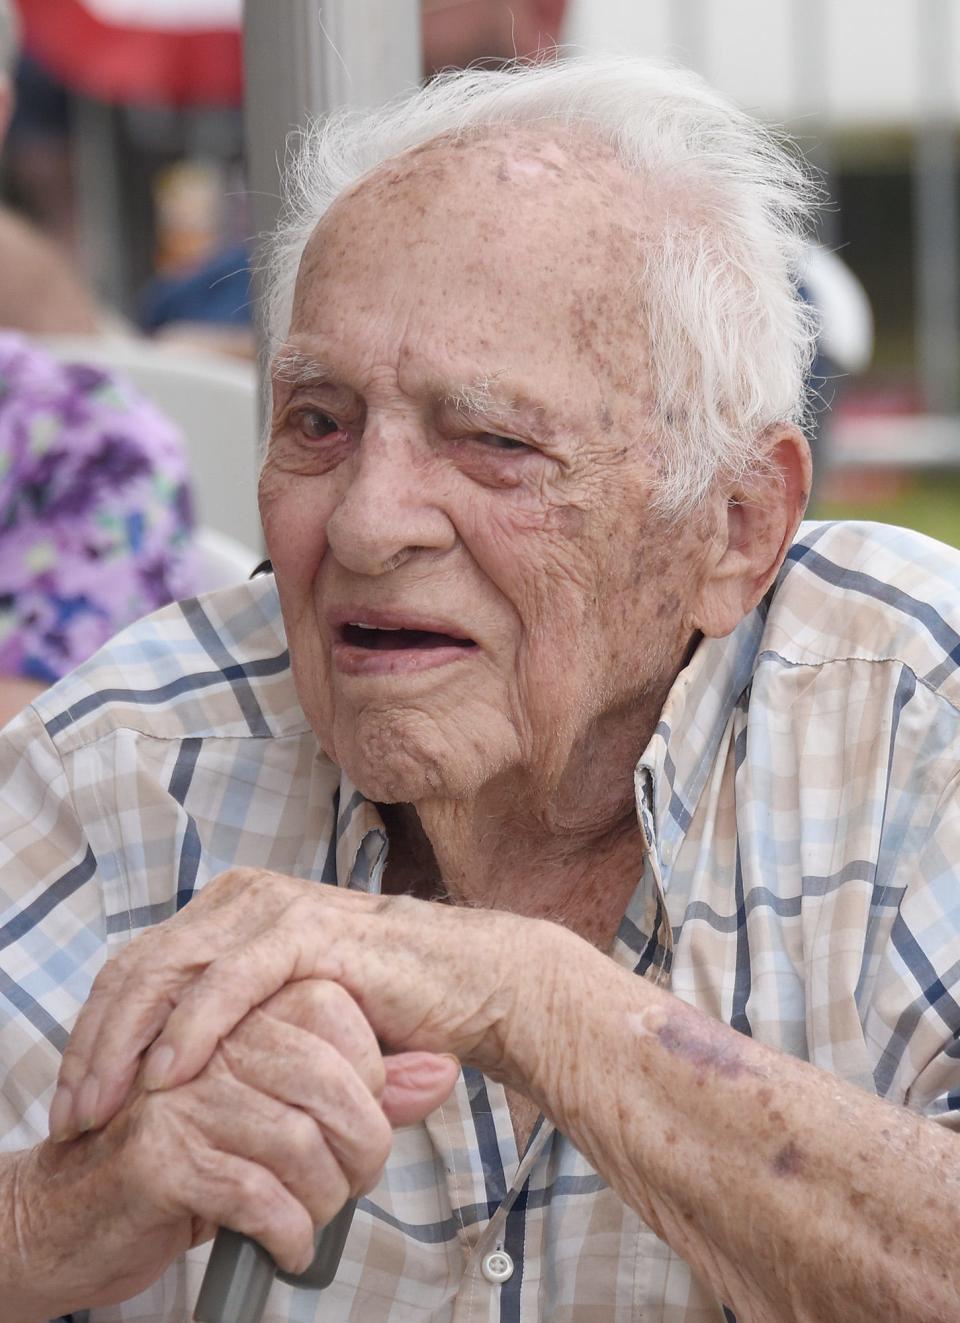 Robert Keinath, of Dundee, was awarded the trophy as the oldest man attending the Senior Citizens' Program Wednesday at the 2023 Monroe County Fair. Keinath is 101 and will be 102 this coming September.